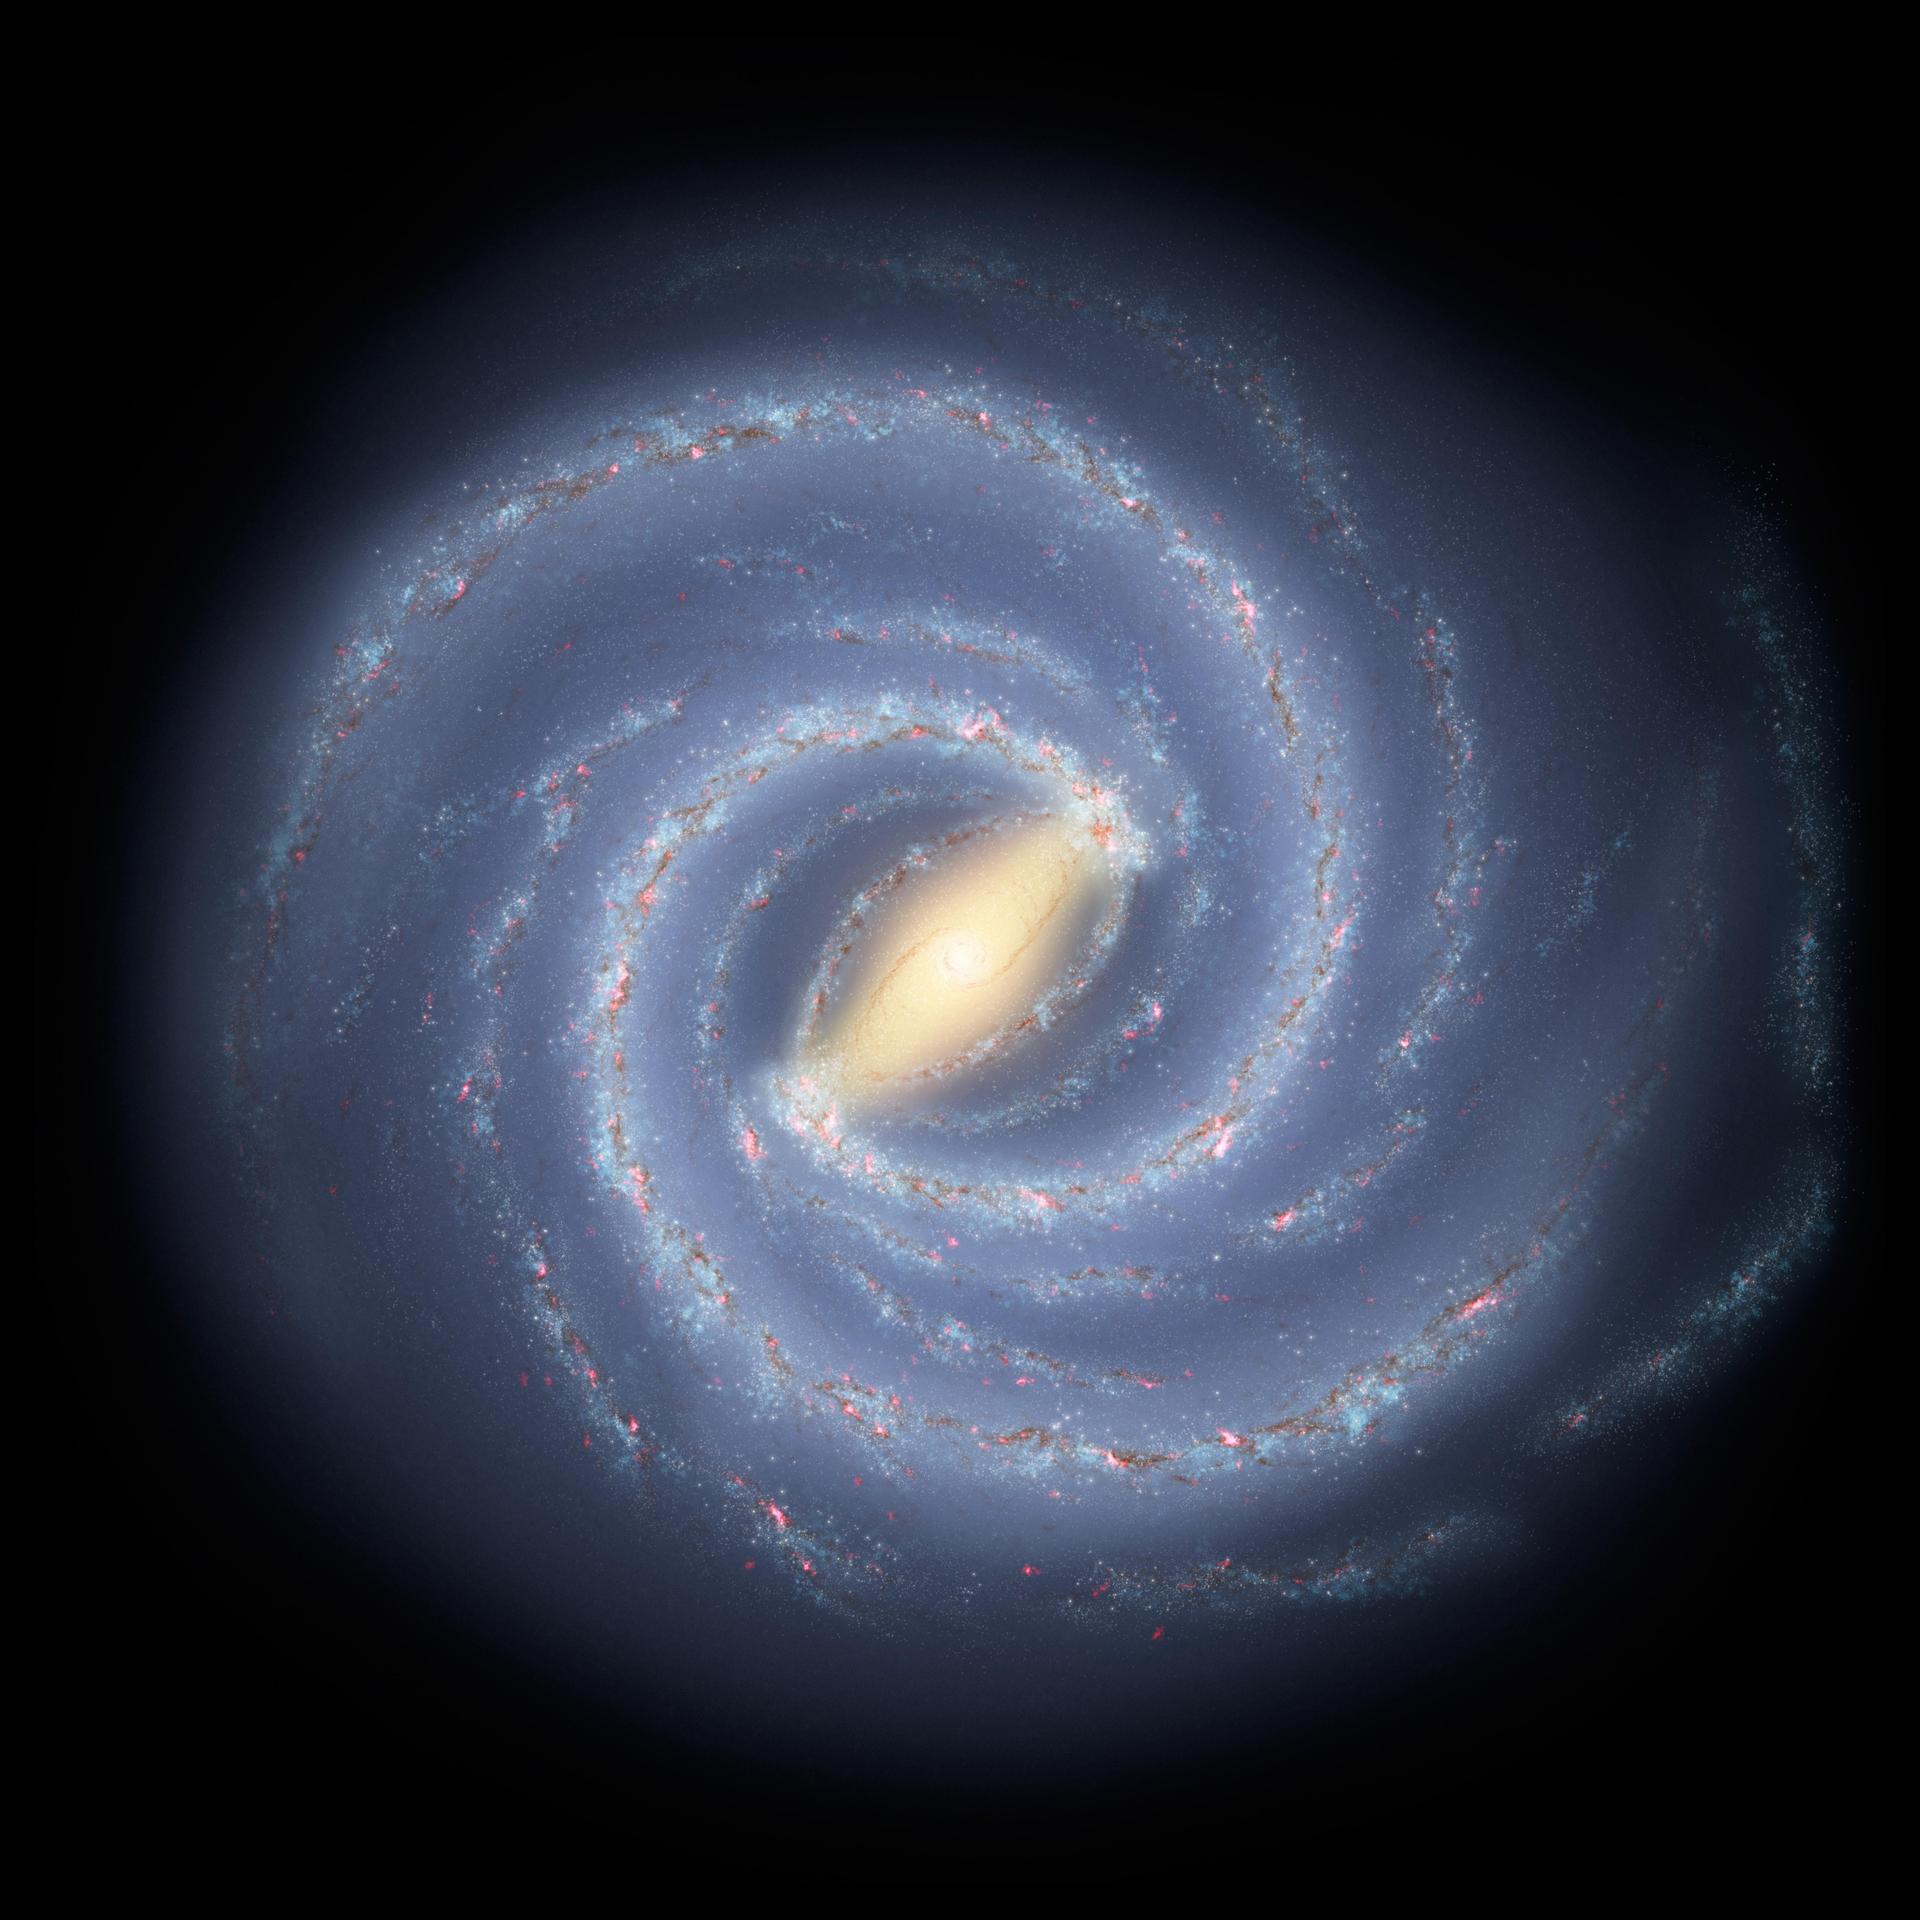 This artist concept illustrates the new view of the Milky Way. The galaxy two major arms can be seen attached to the ends of a thick central bar, while the two now-demoted minor arms are less distinct and located between the major arms.